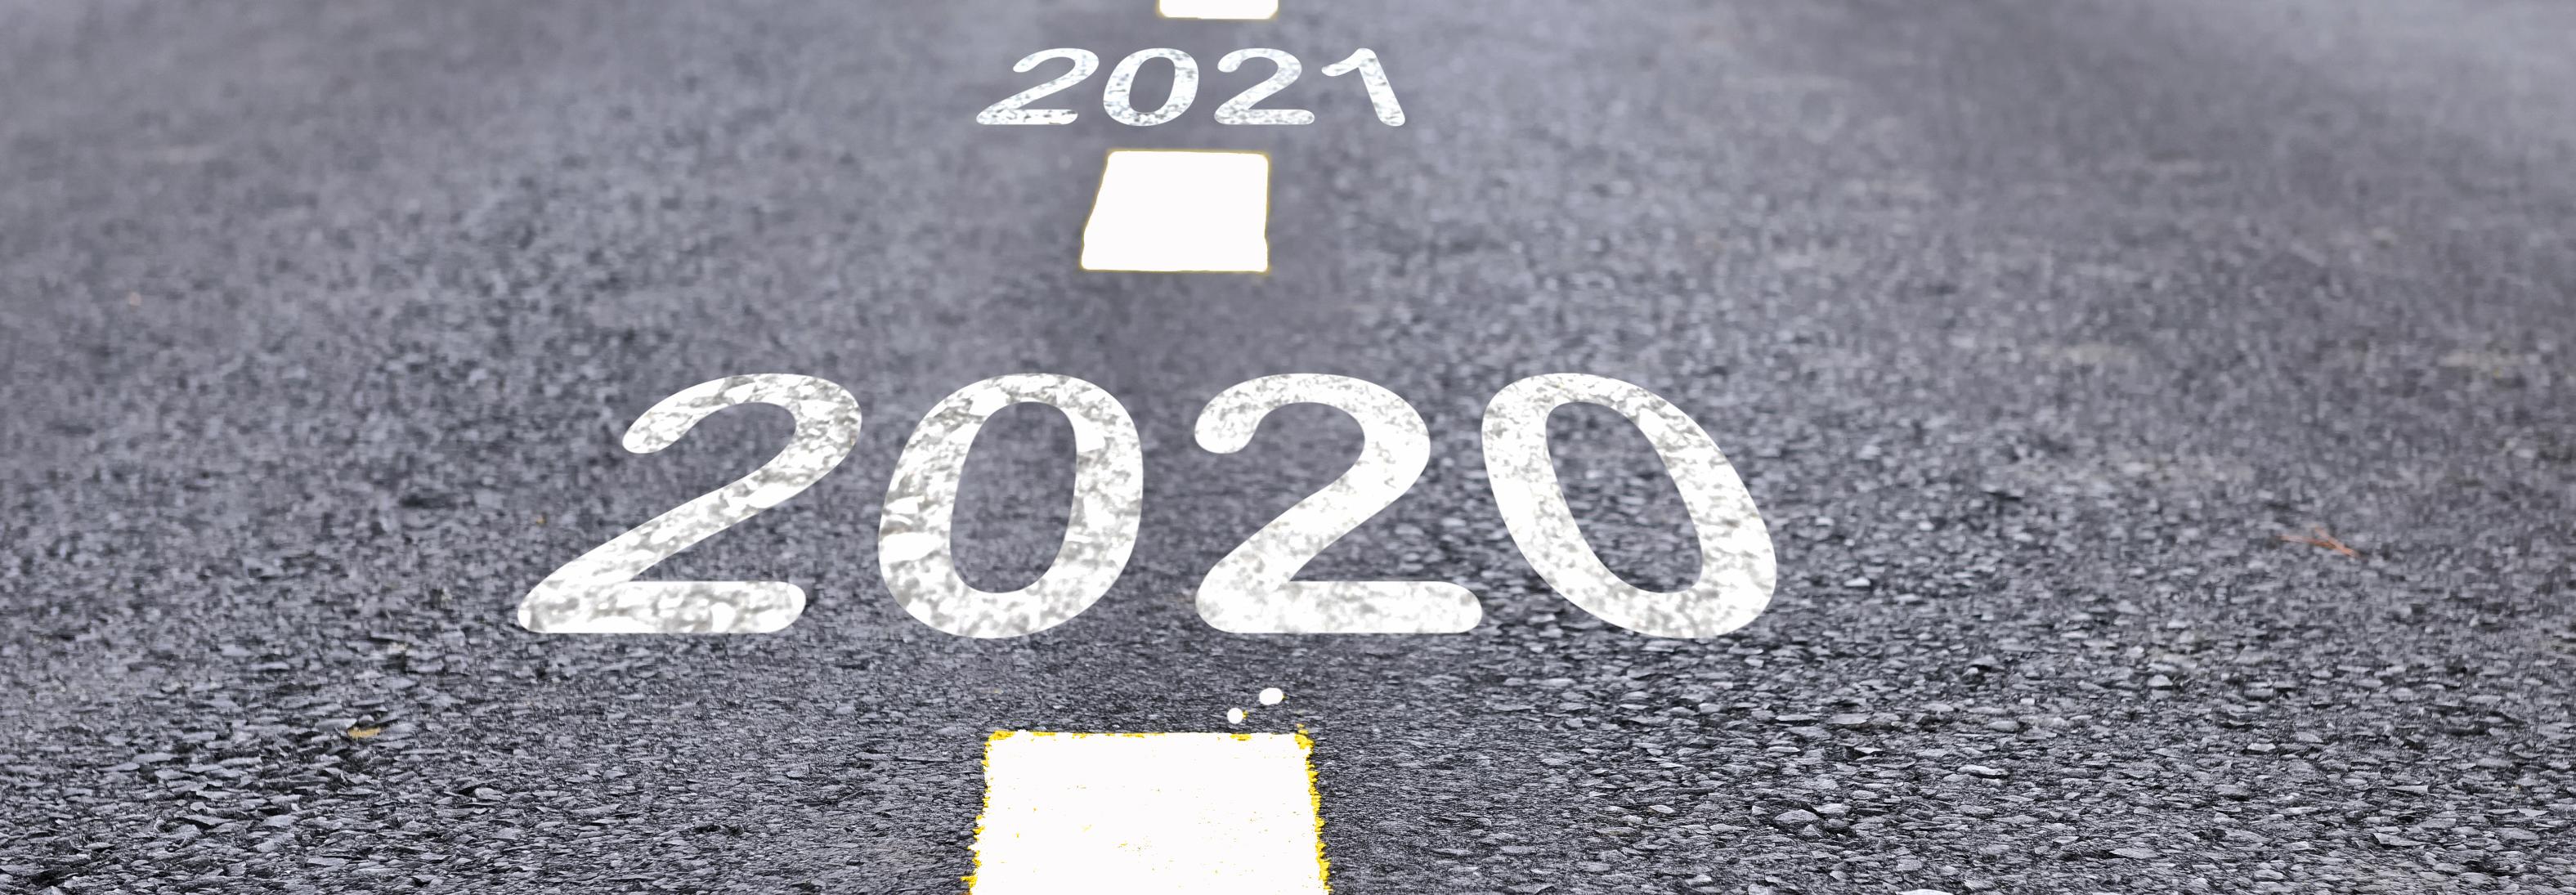 Road with 2020 and 2021 painted white on it into distance